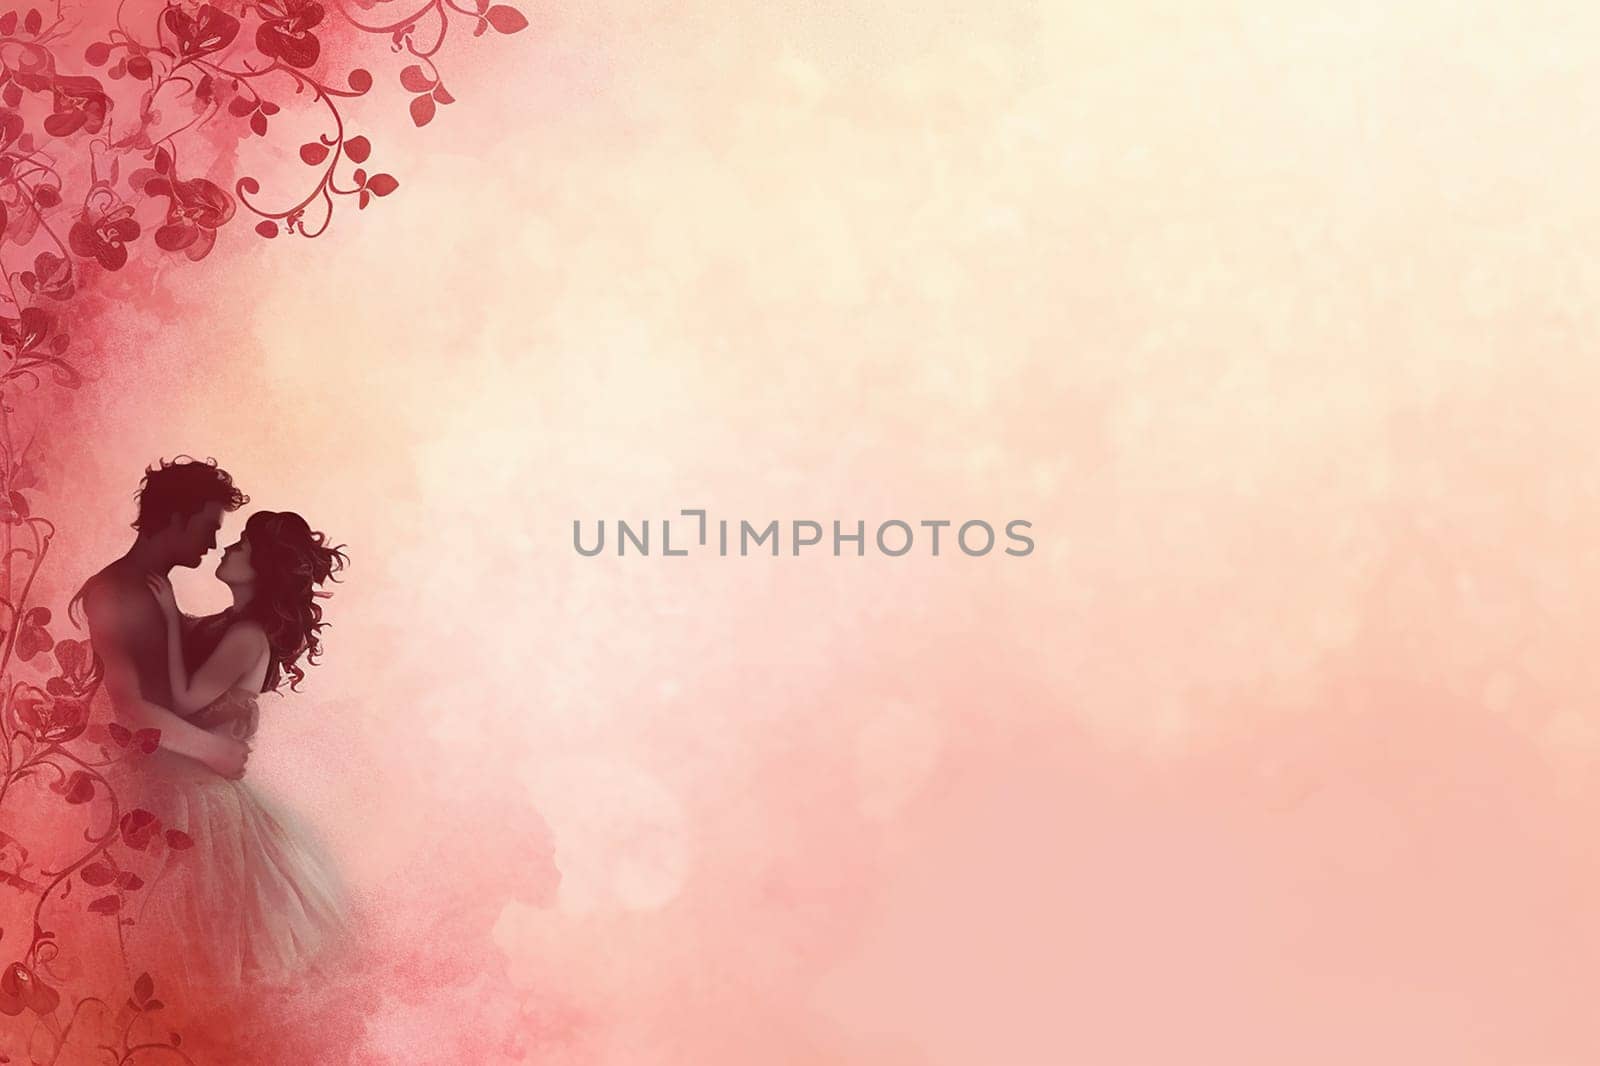 Silhouette of a couple embracing in a romantic setting with red floral accents.